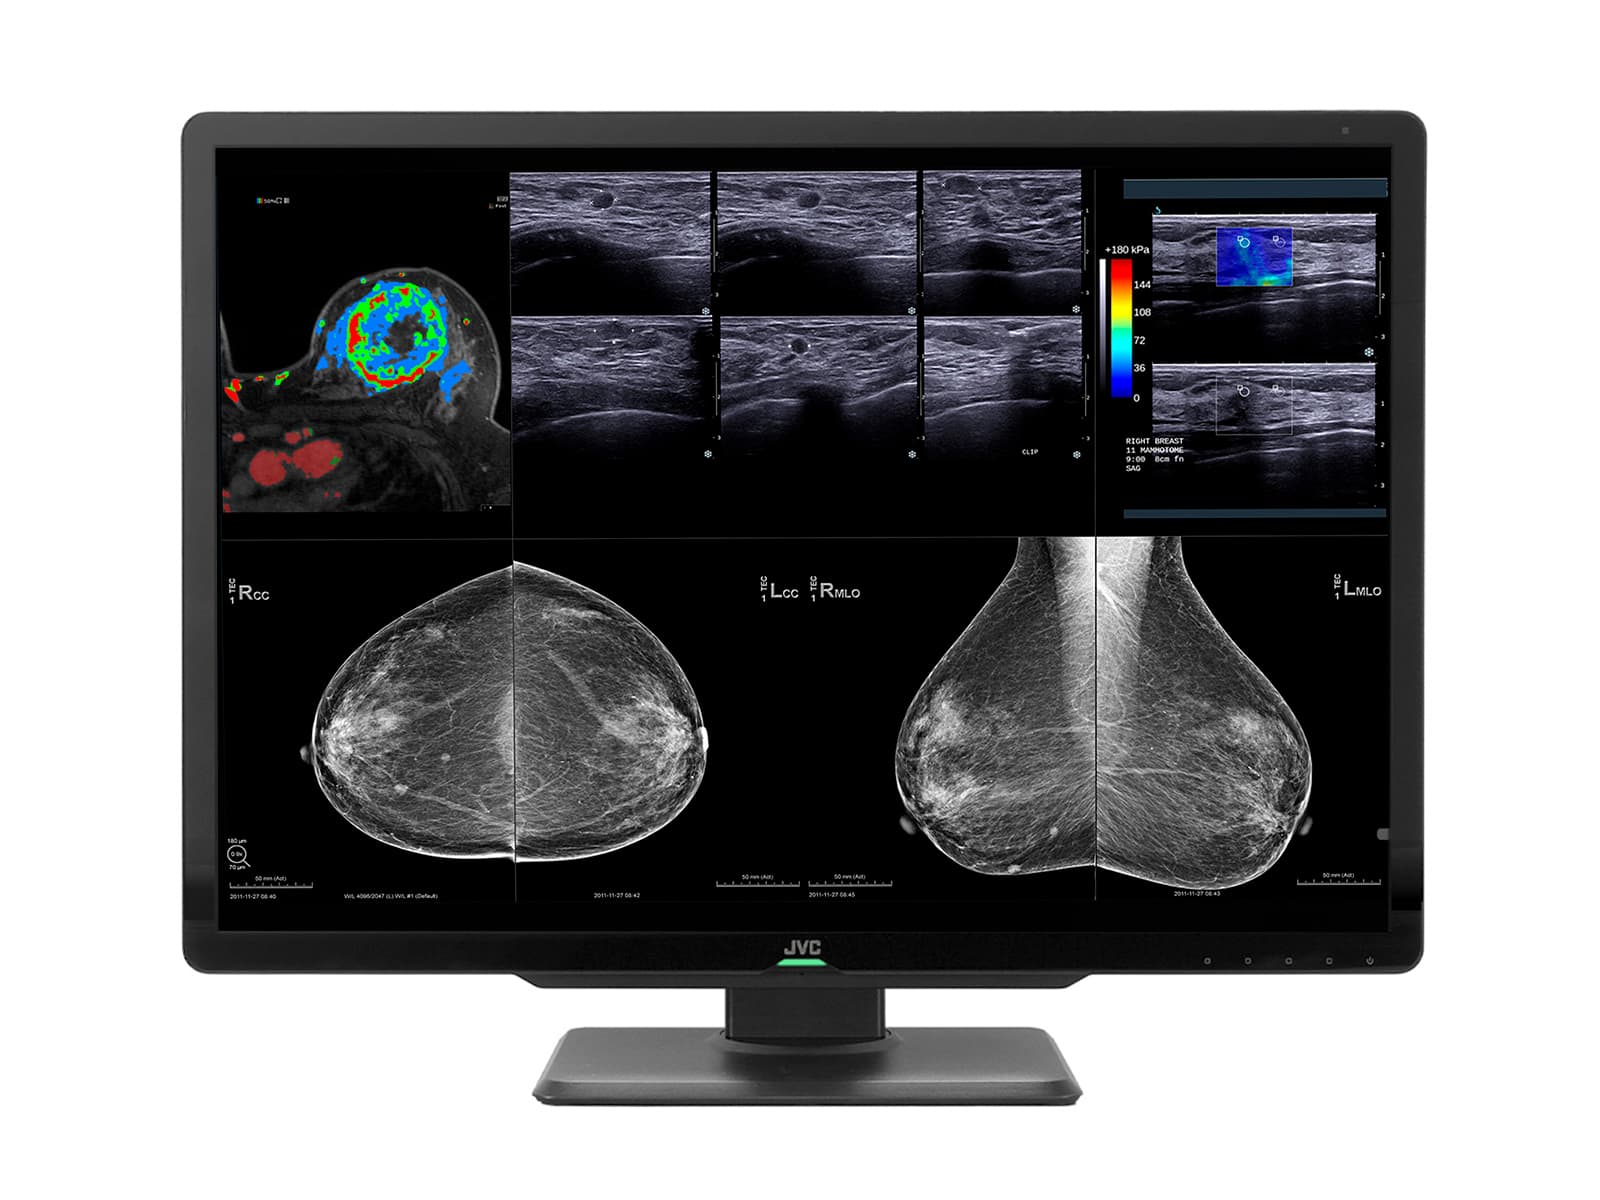 Complete Mammography Reading Station | JVC Totoku 12MP Color Display | Lenovo Workstation | Dictation Mic | Worklist Monitors (CLS1200P520) Monitors.com 